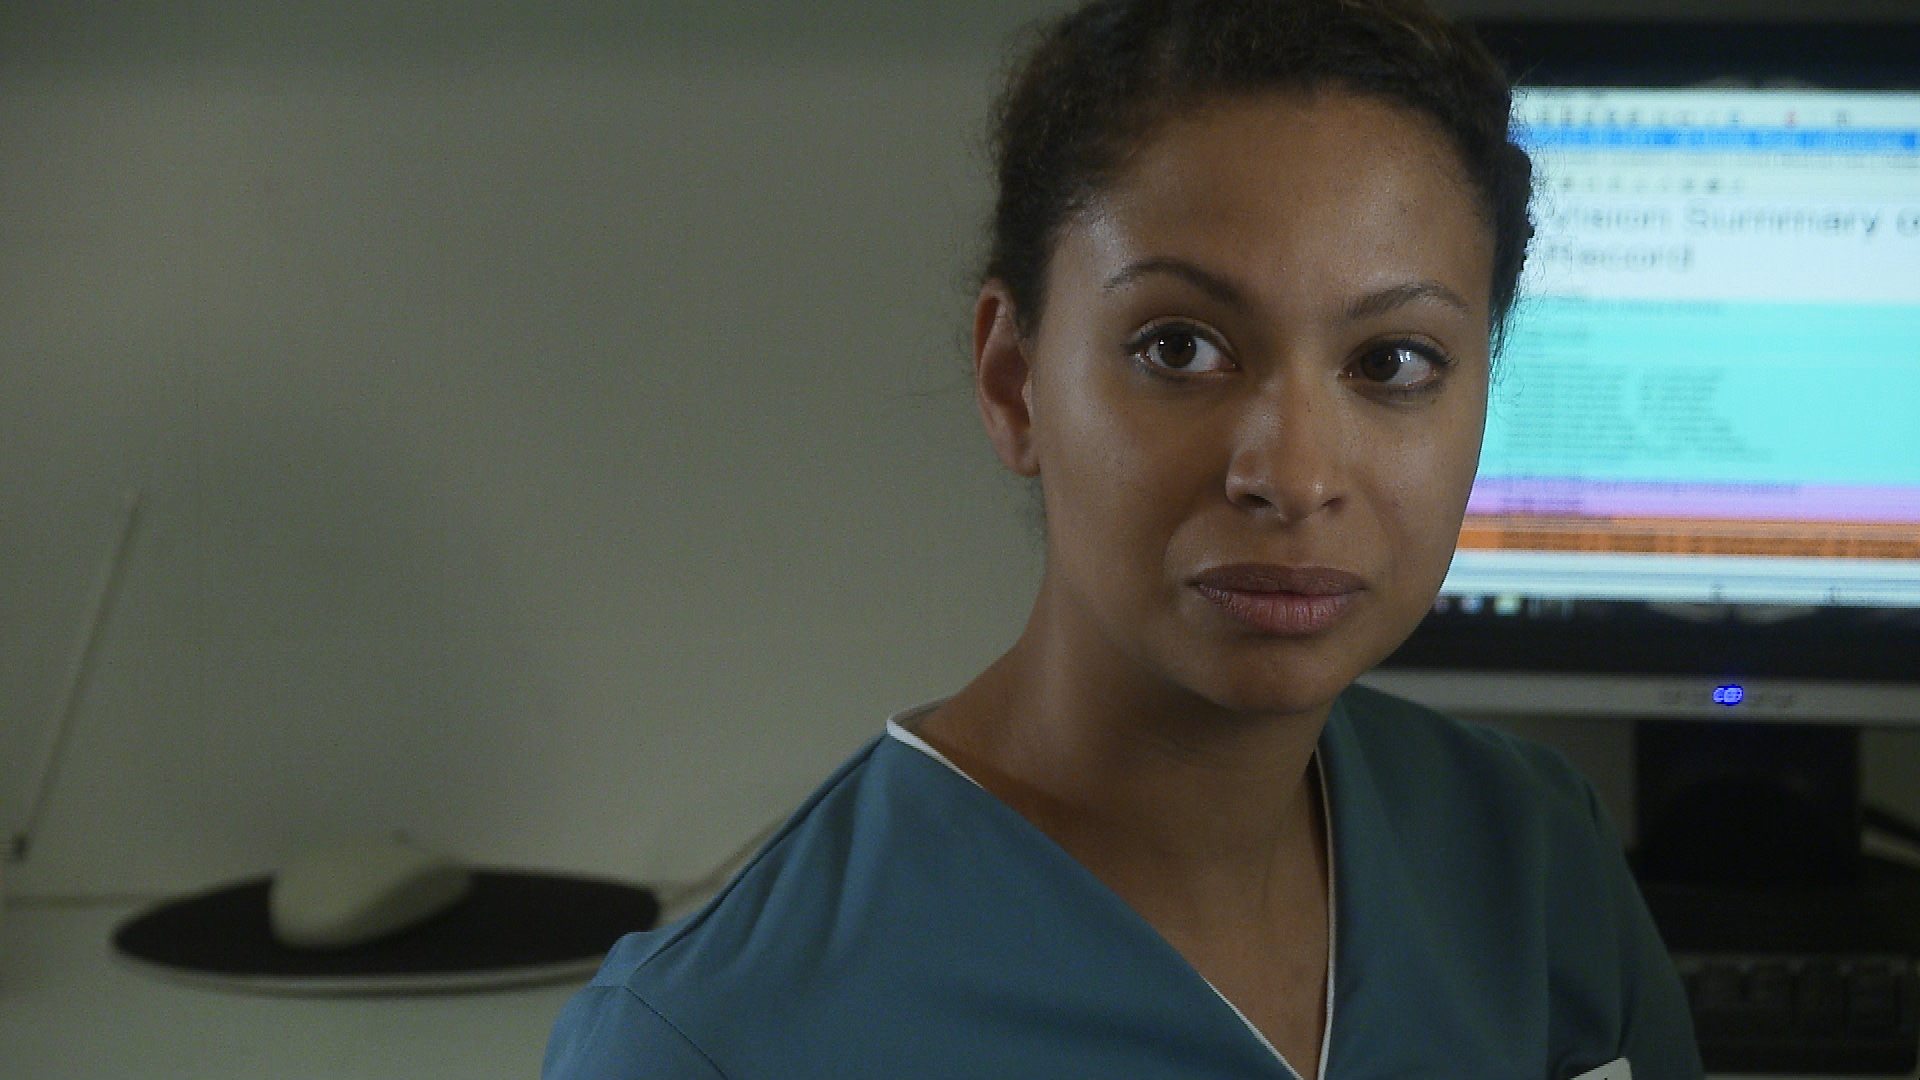 BBC One - Doctors, New Cast Member Laura Rollins Lifts the lid on her character Ayesha Lee - p02fg372